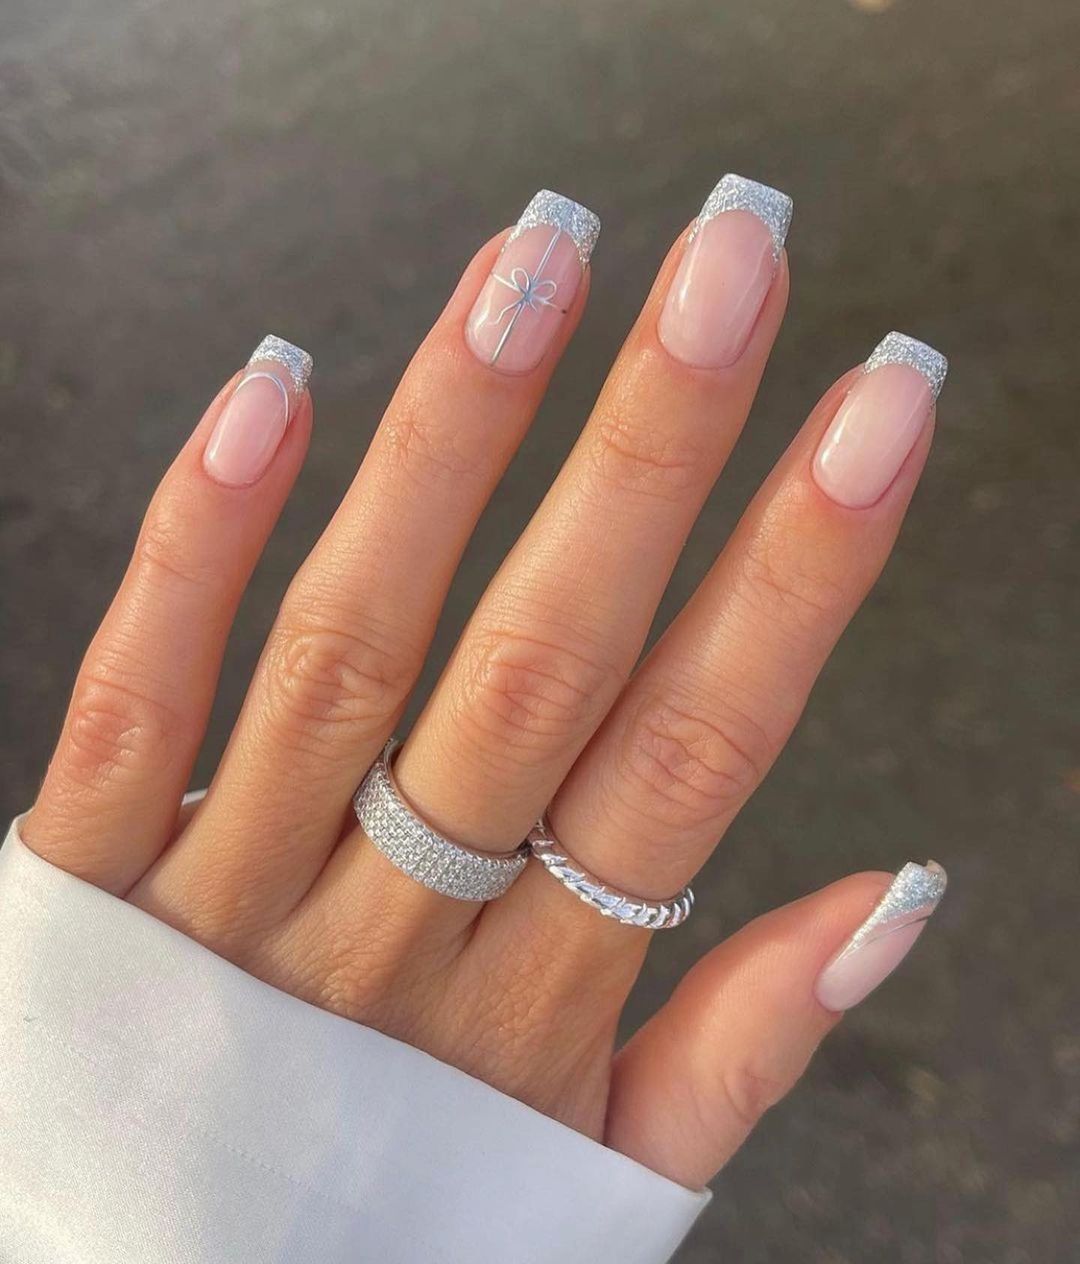 French manicure wedding nail with glitter accents